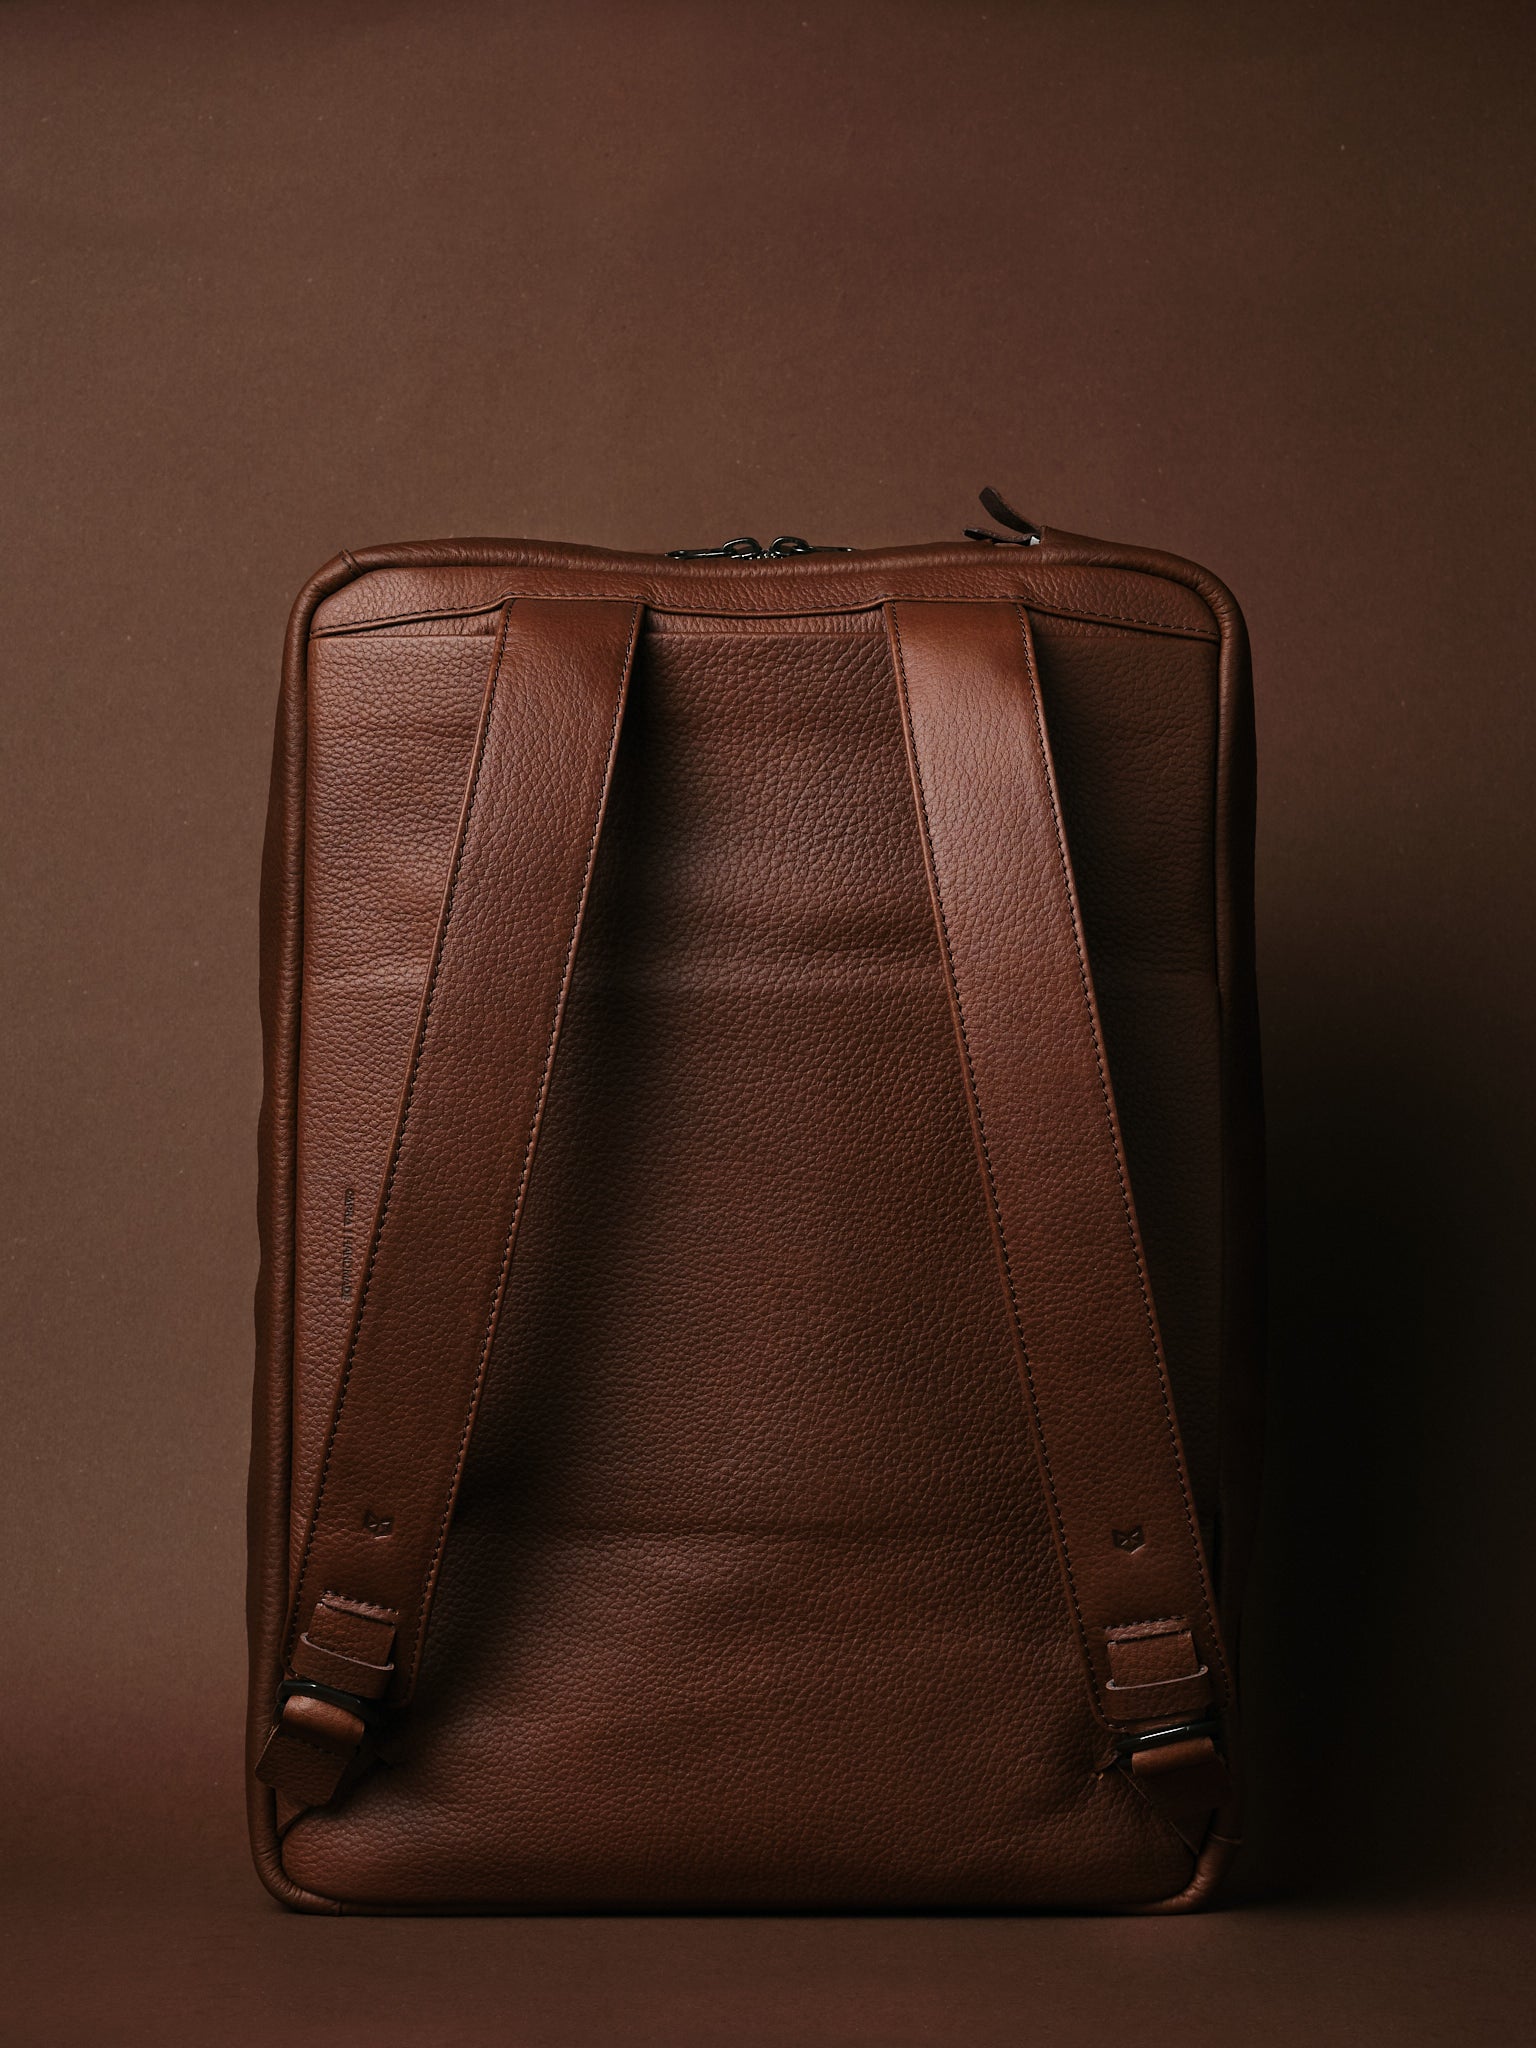 Hideaway shoulder straps. Tech Backpack. Backpack Briefcase Hybrid Brown by Capra Leather